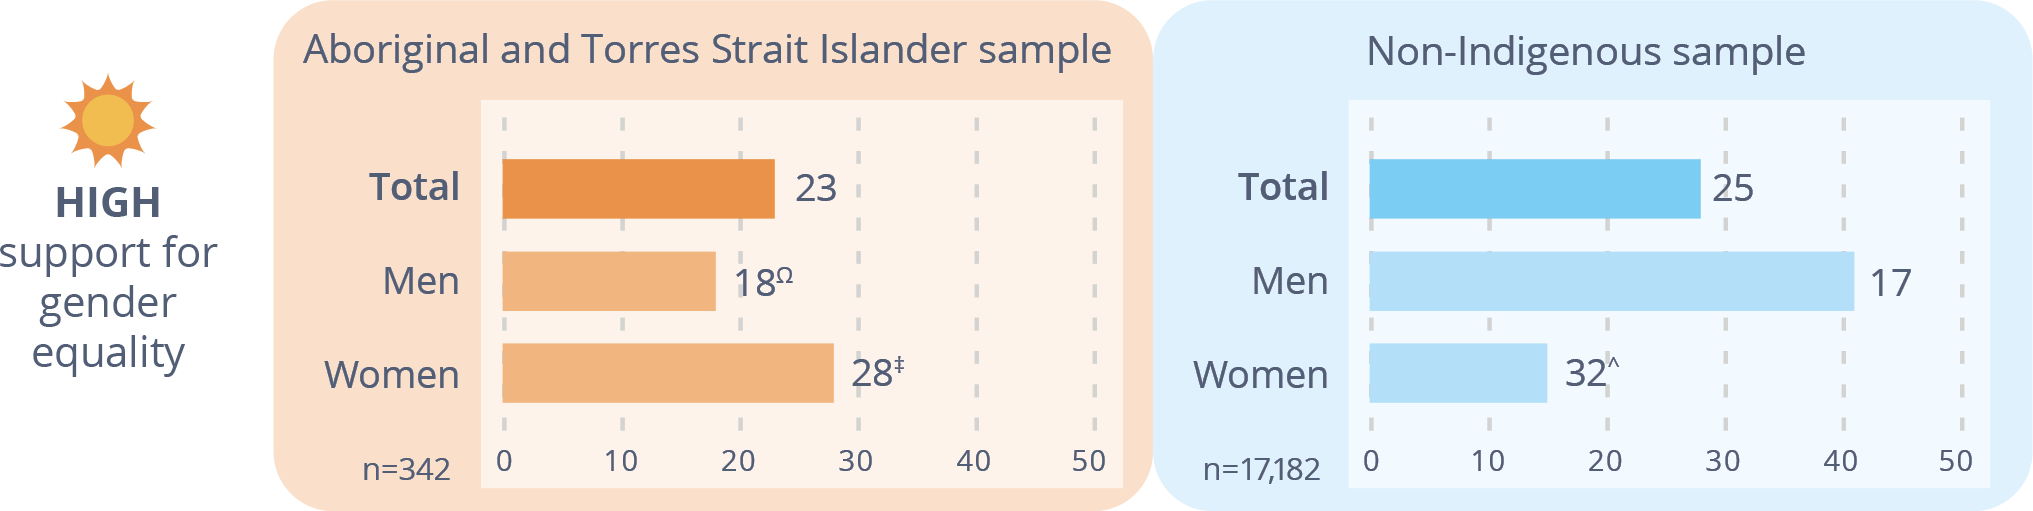 Figure 4-7: Relative attitudinal support for gender equality, Aboriginal and Torres Strait Islander and non-indigenous samples, 2017 (%) Data table below